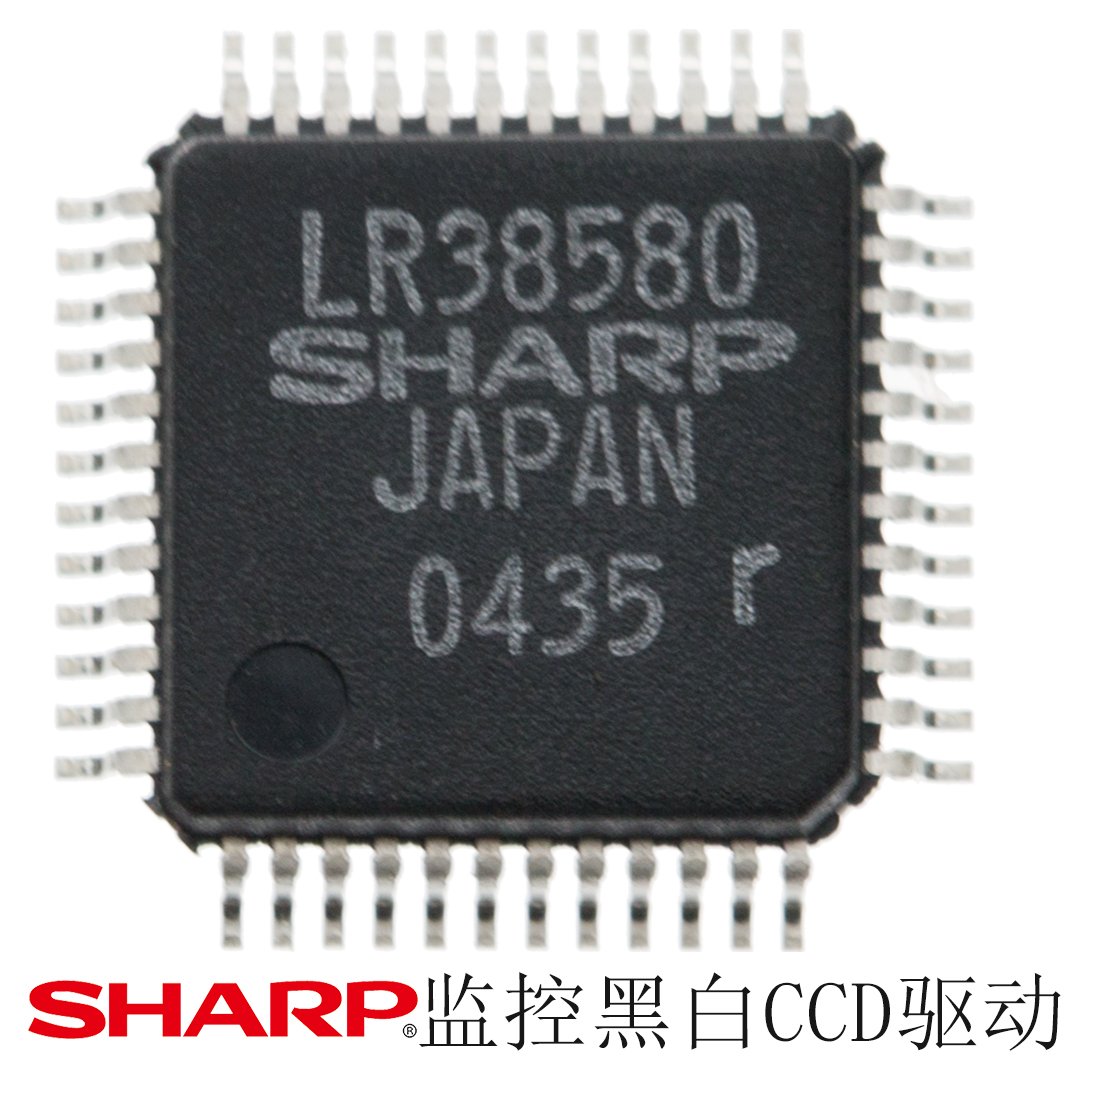 SHARP Black and white CCD driver MCU, Sharp ccd driver IC, black and white CCD driver IC, LR38580 original stock, normal image and mirror can be switched, ElA and CCIR mode switch